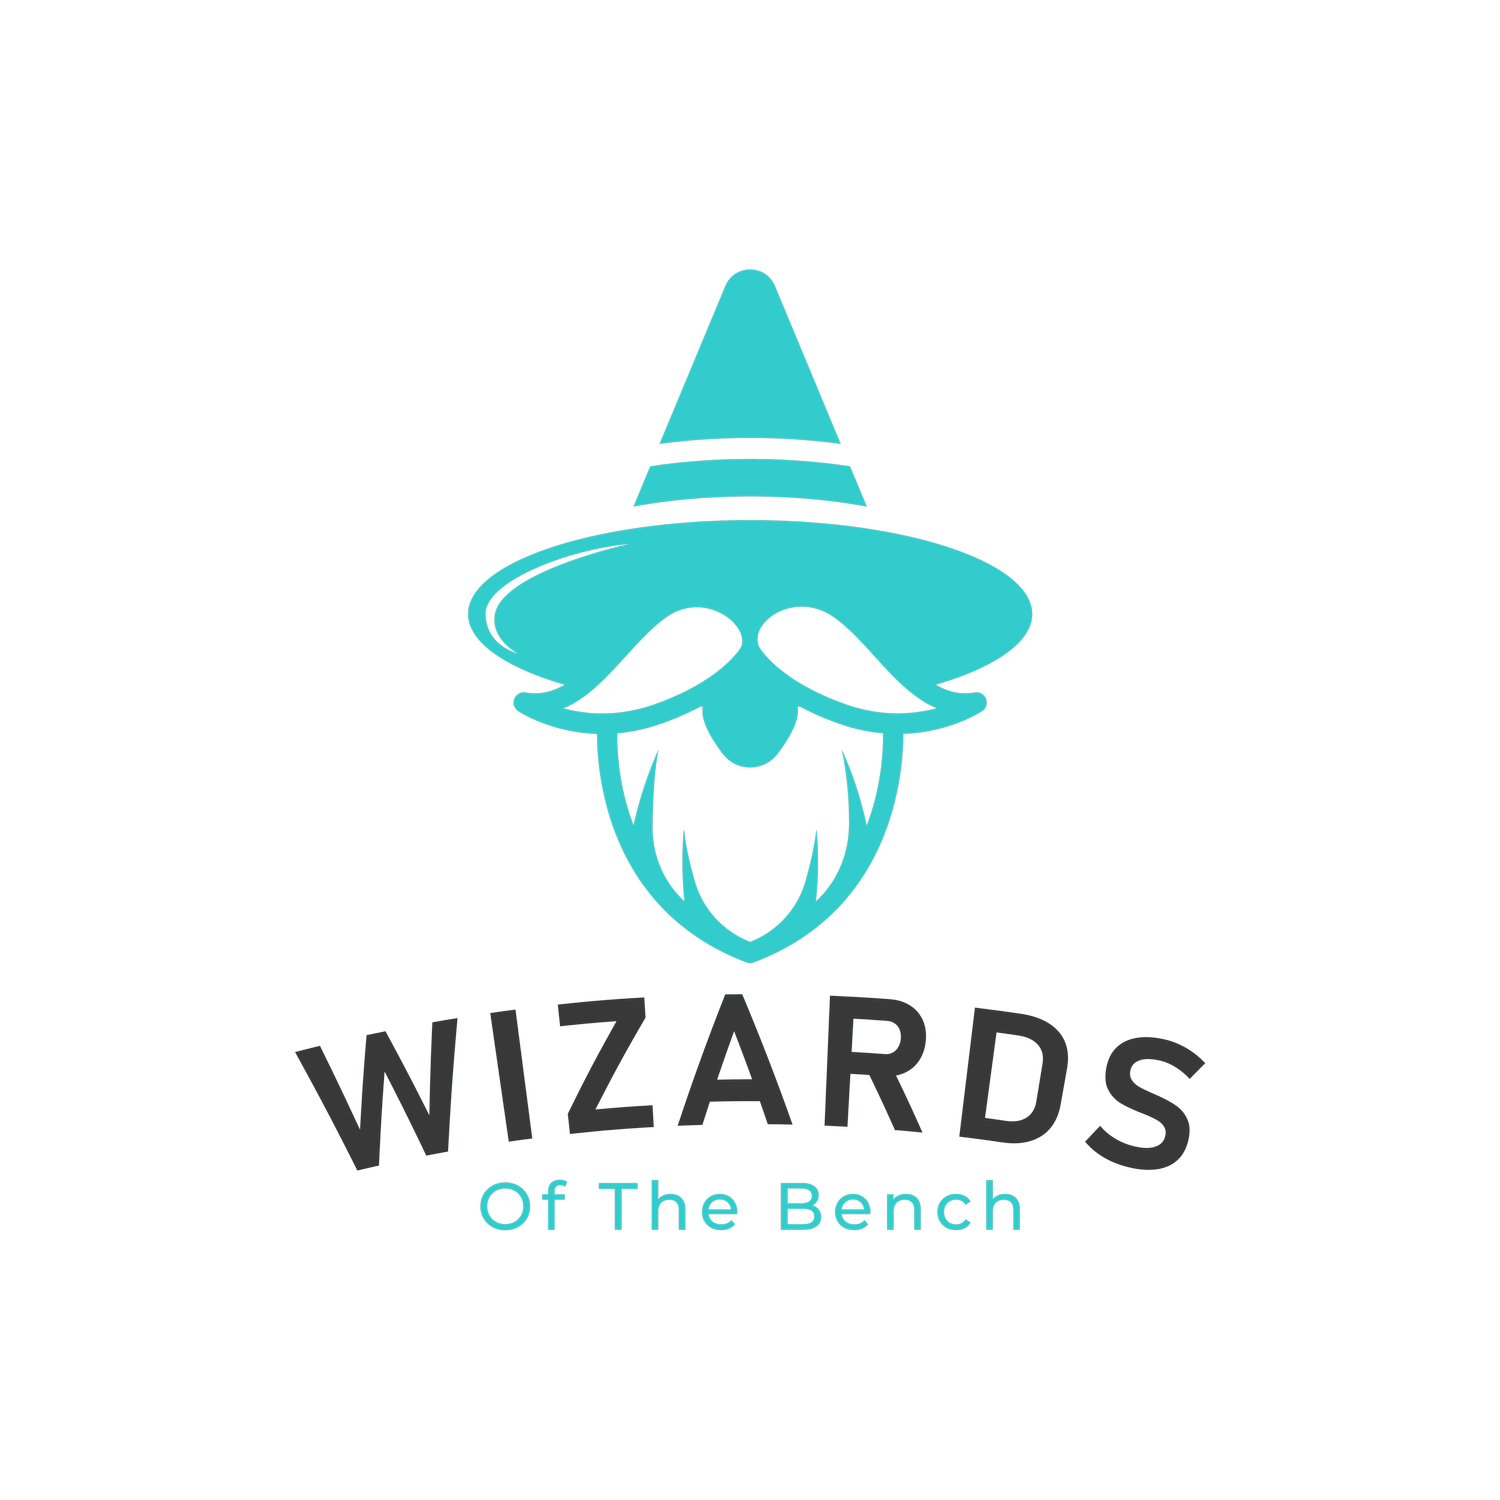 Wizards of the Bench